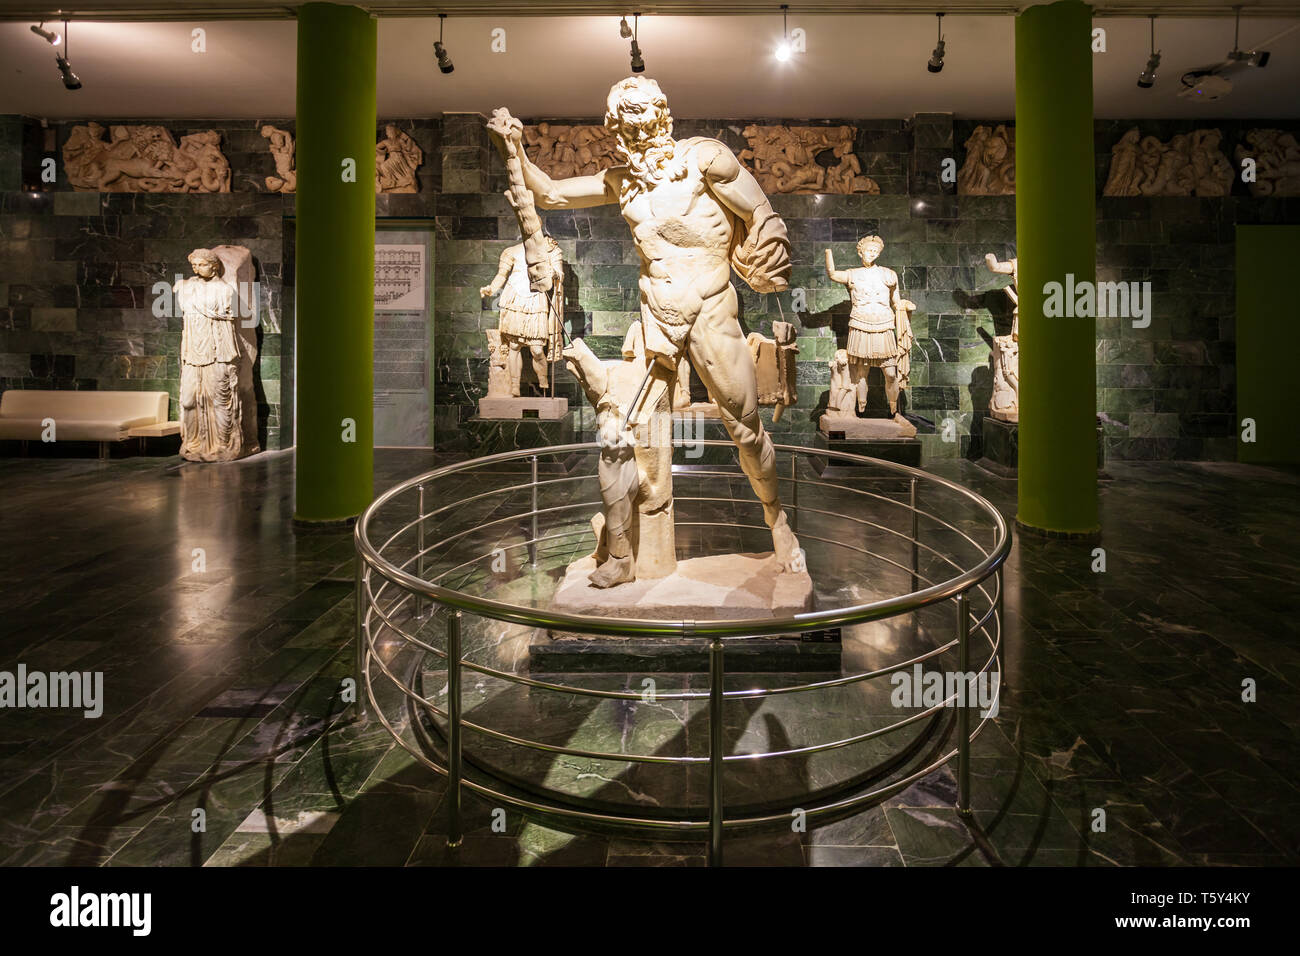 ANTALYA, TURKEY - SEPTEMBER 14, 2014: Antalya Archeological Museum is one of Turkey's largest museums located in Antalya city in Turkey Stock Photo